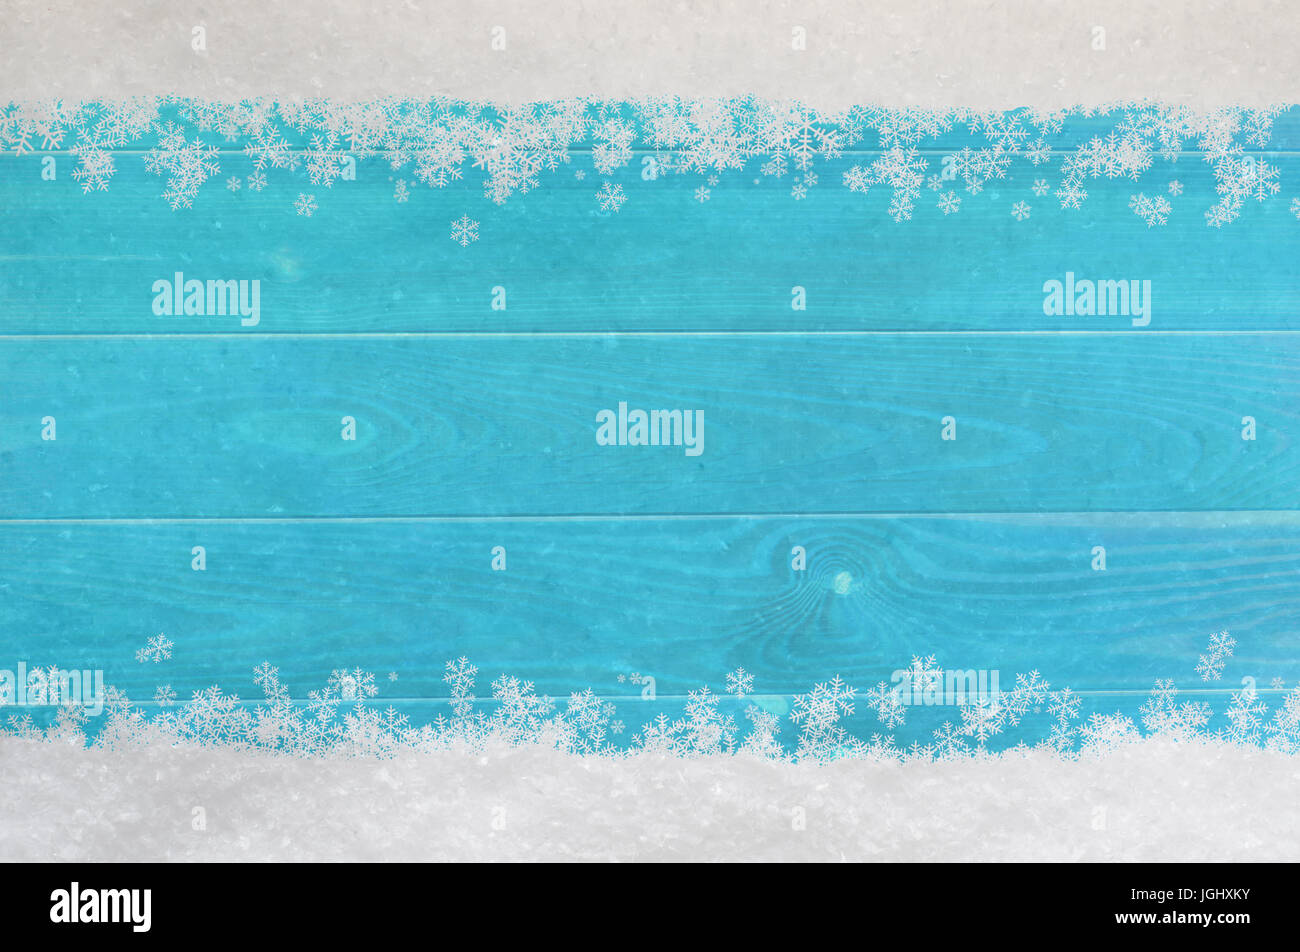 Christmas snow and snowflakes border at top and bottom of light, bright blue wood planking. Stock Photo